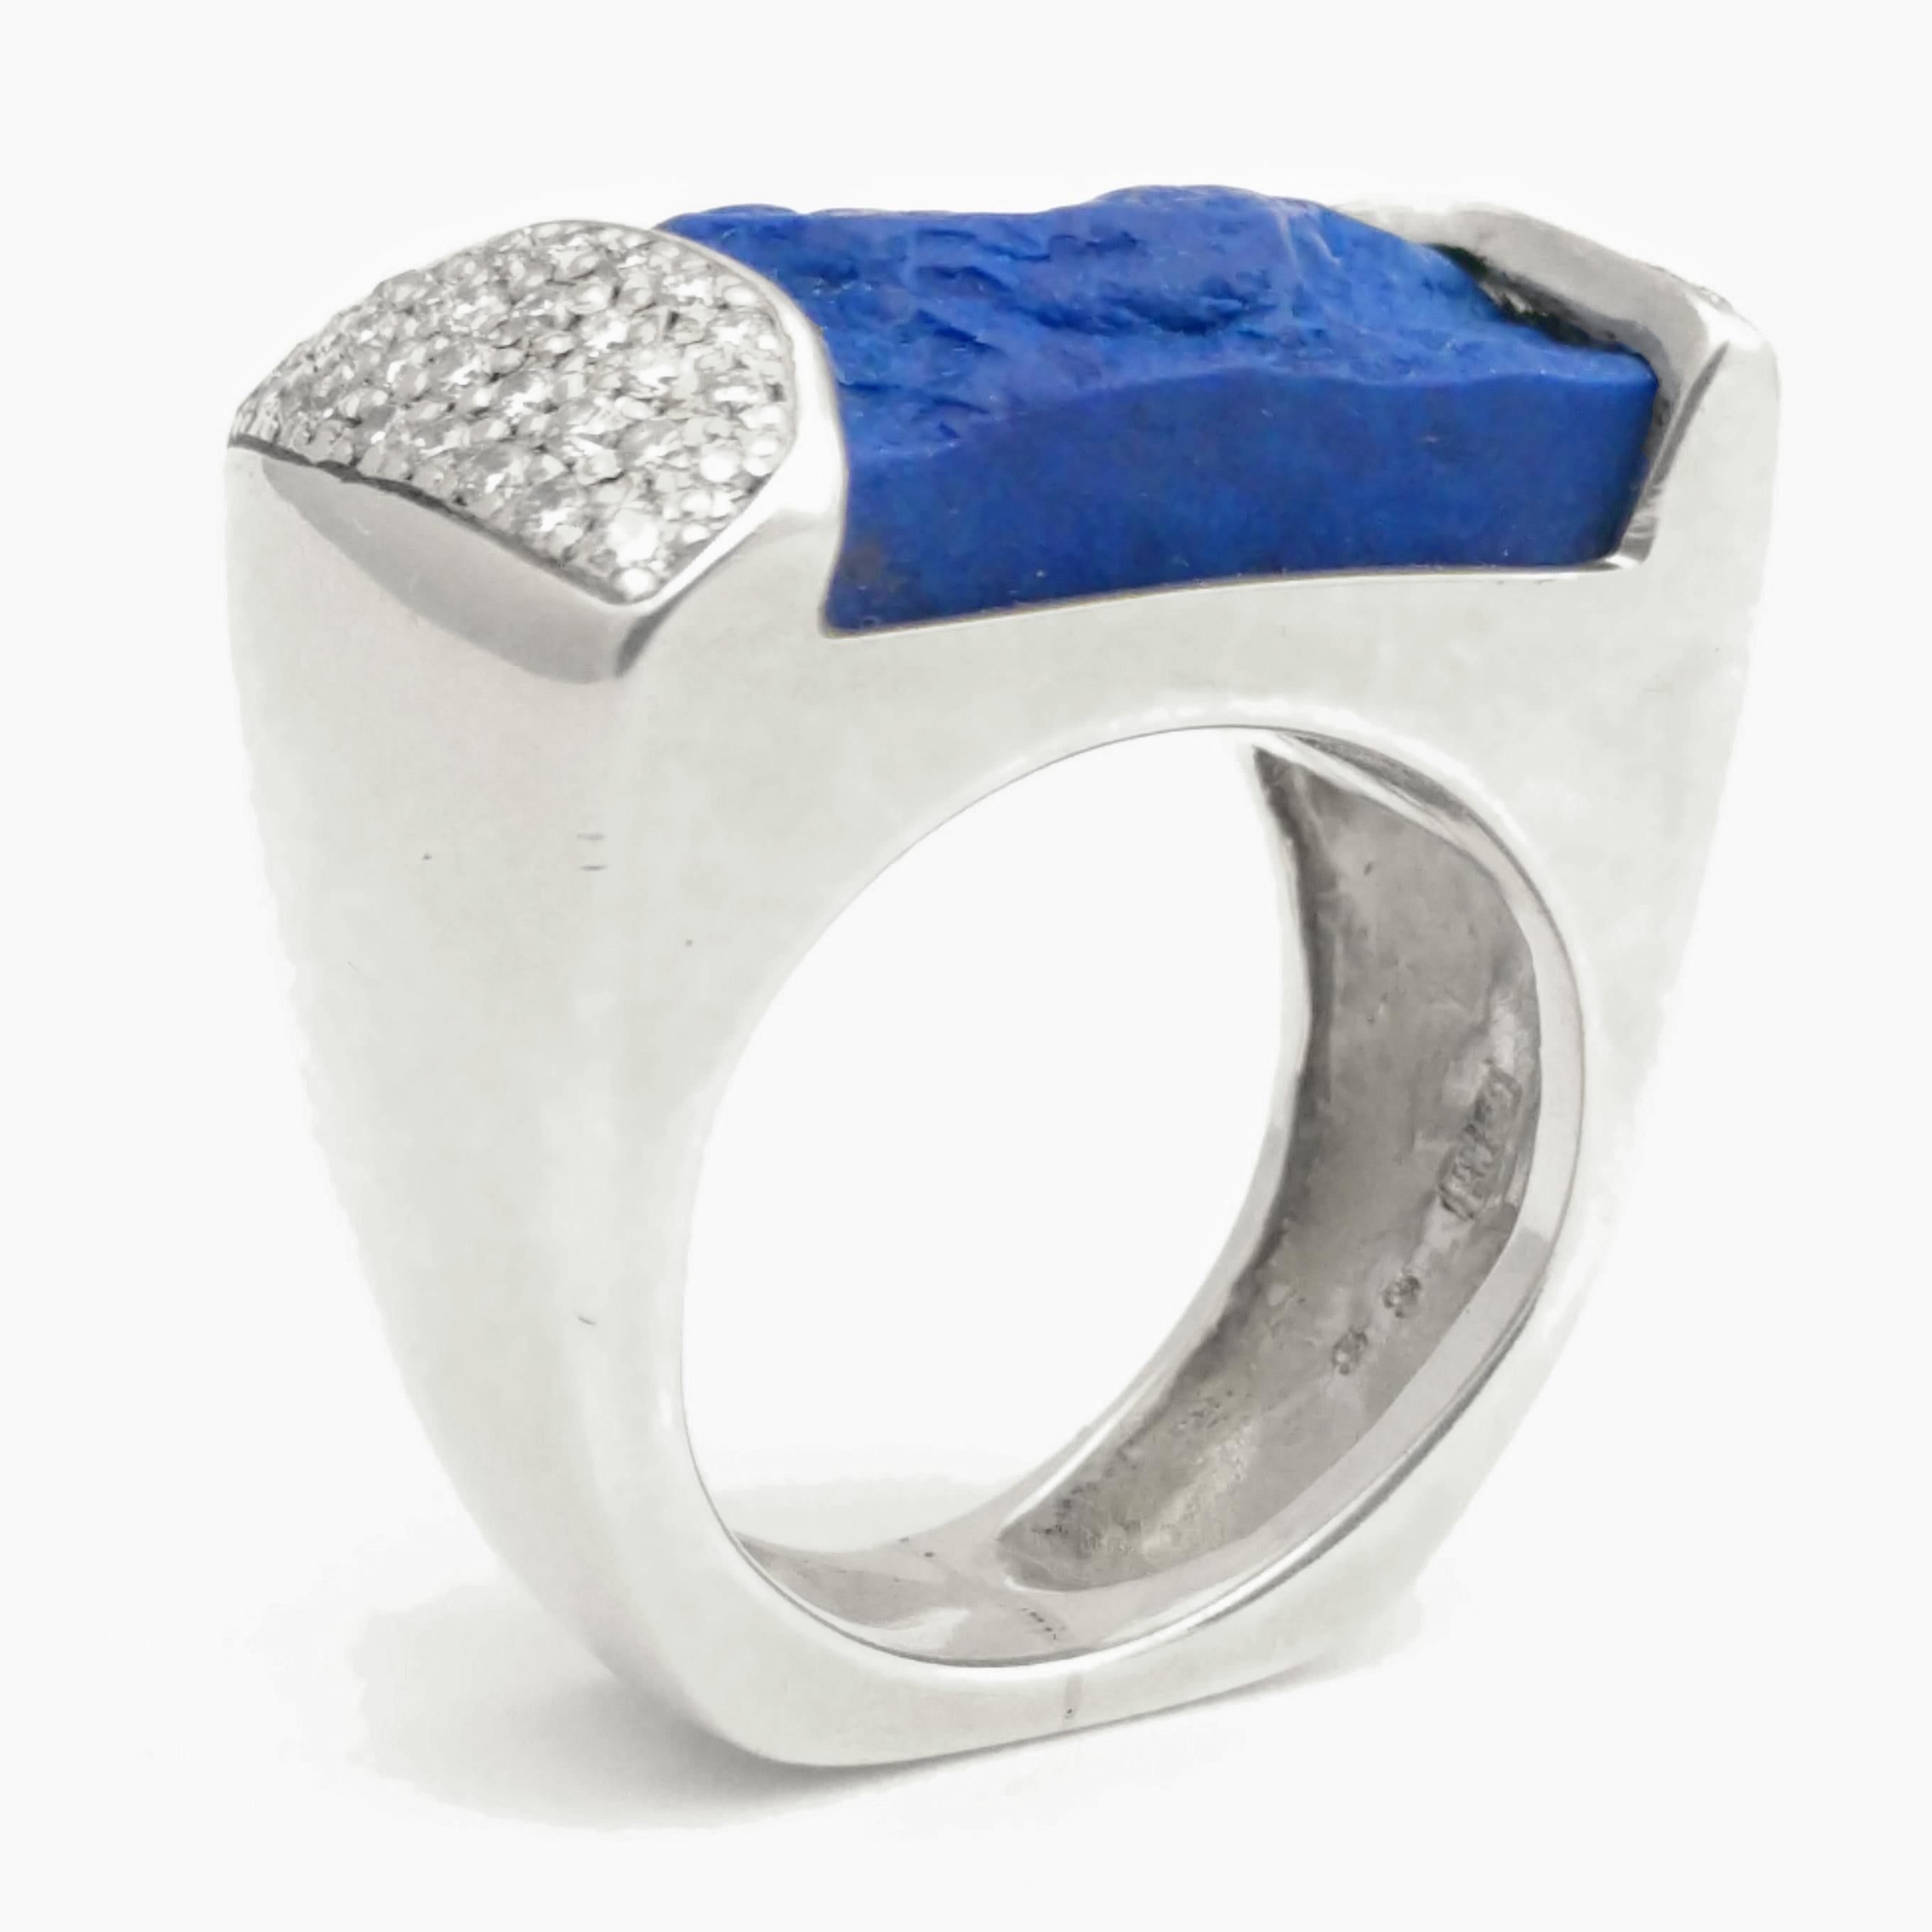 Rough Lapis and Pave Diamonds Statement Ring Stylish Western Look in Silver In New Condition For Sale In Scottsdale, AZ